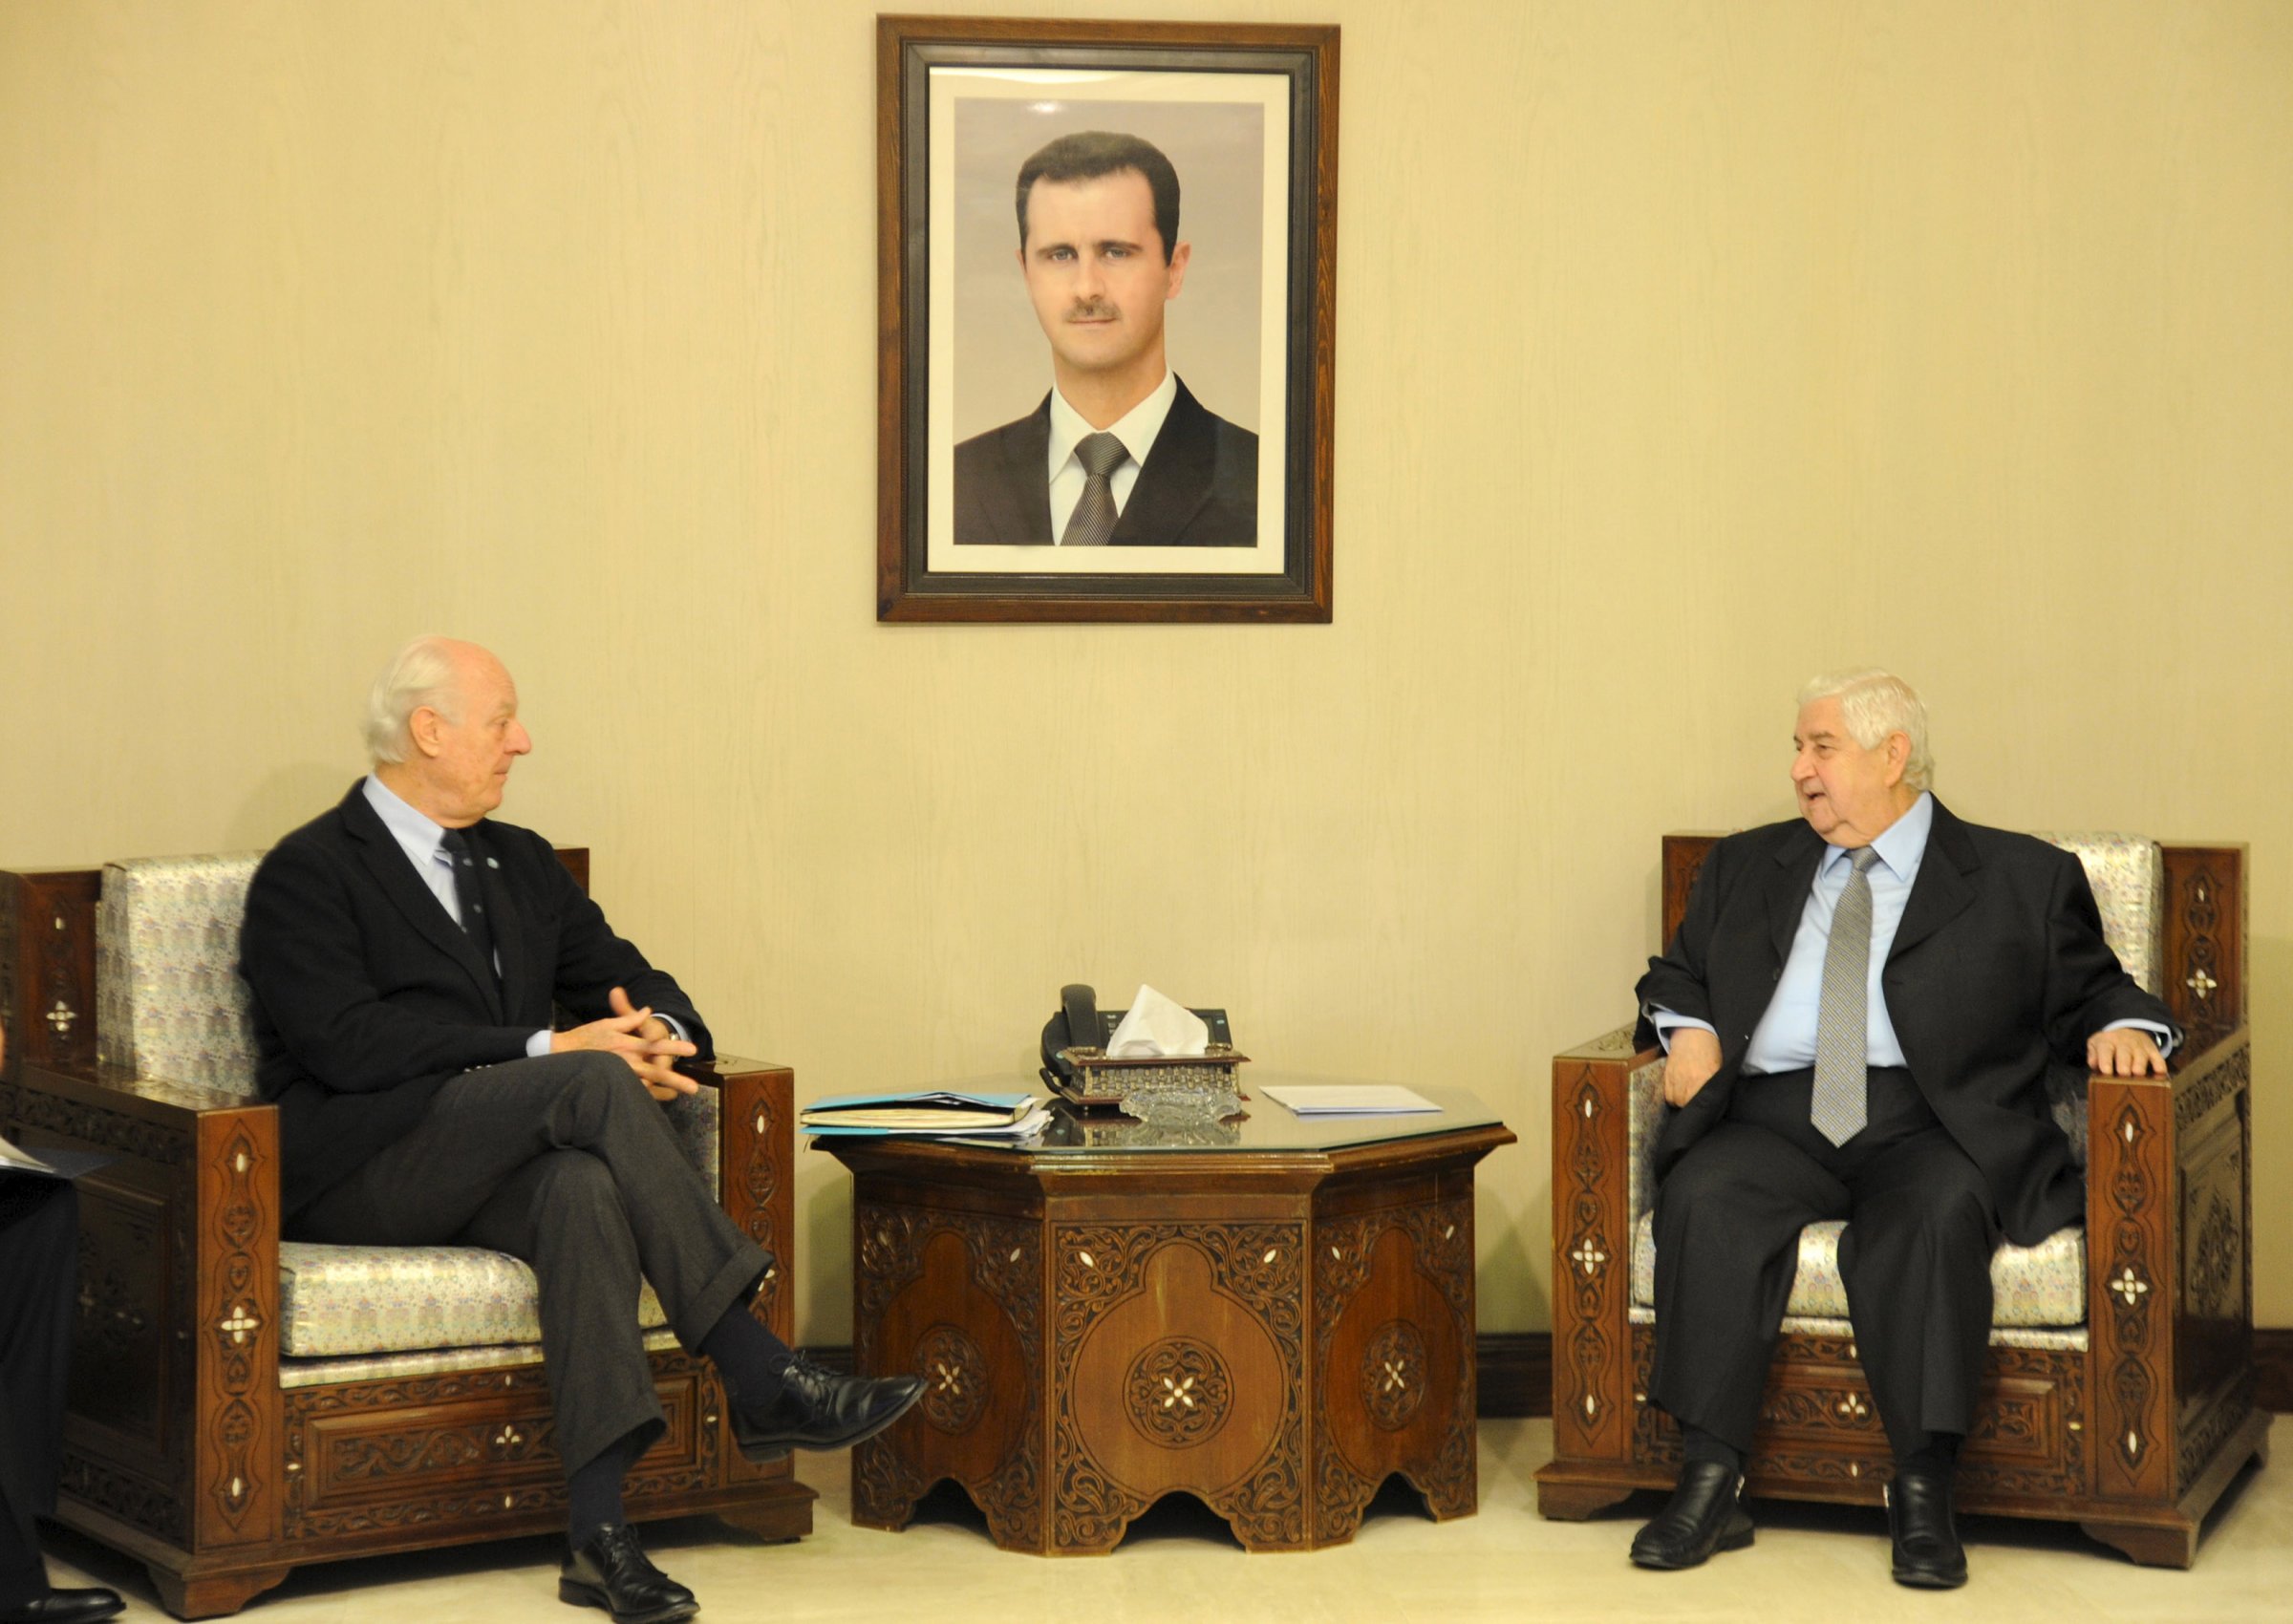 SANA handout photo shows Syria's Foreign Minister Walid al-Moualem (R) talking  with U.N. Special Envoy for Syria Staffan de Mistura (L) in Damascus